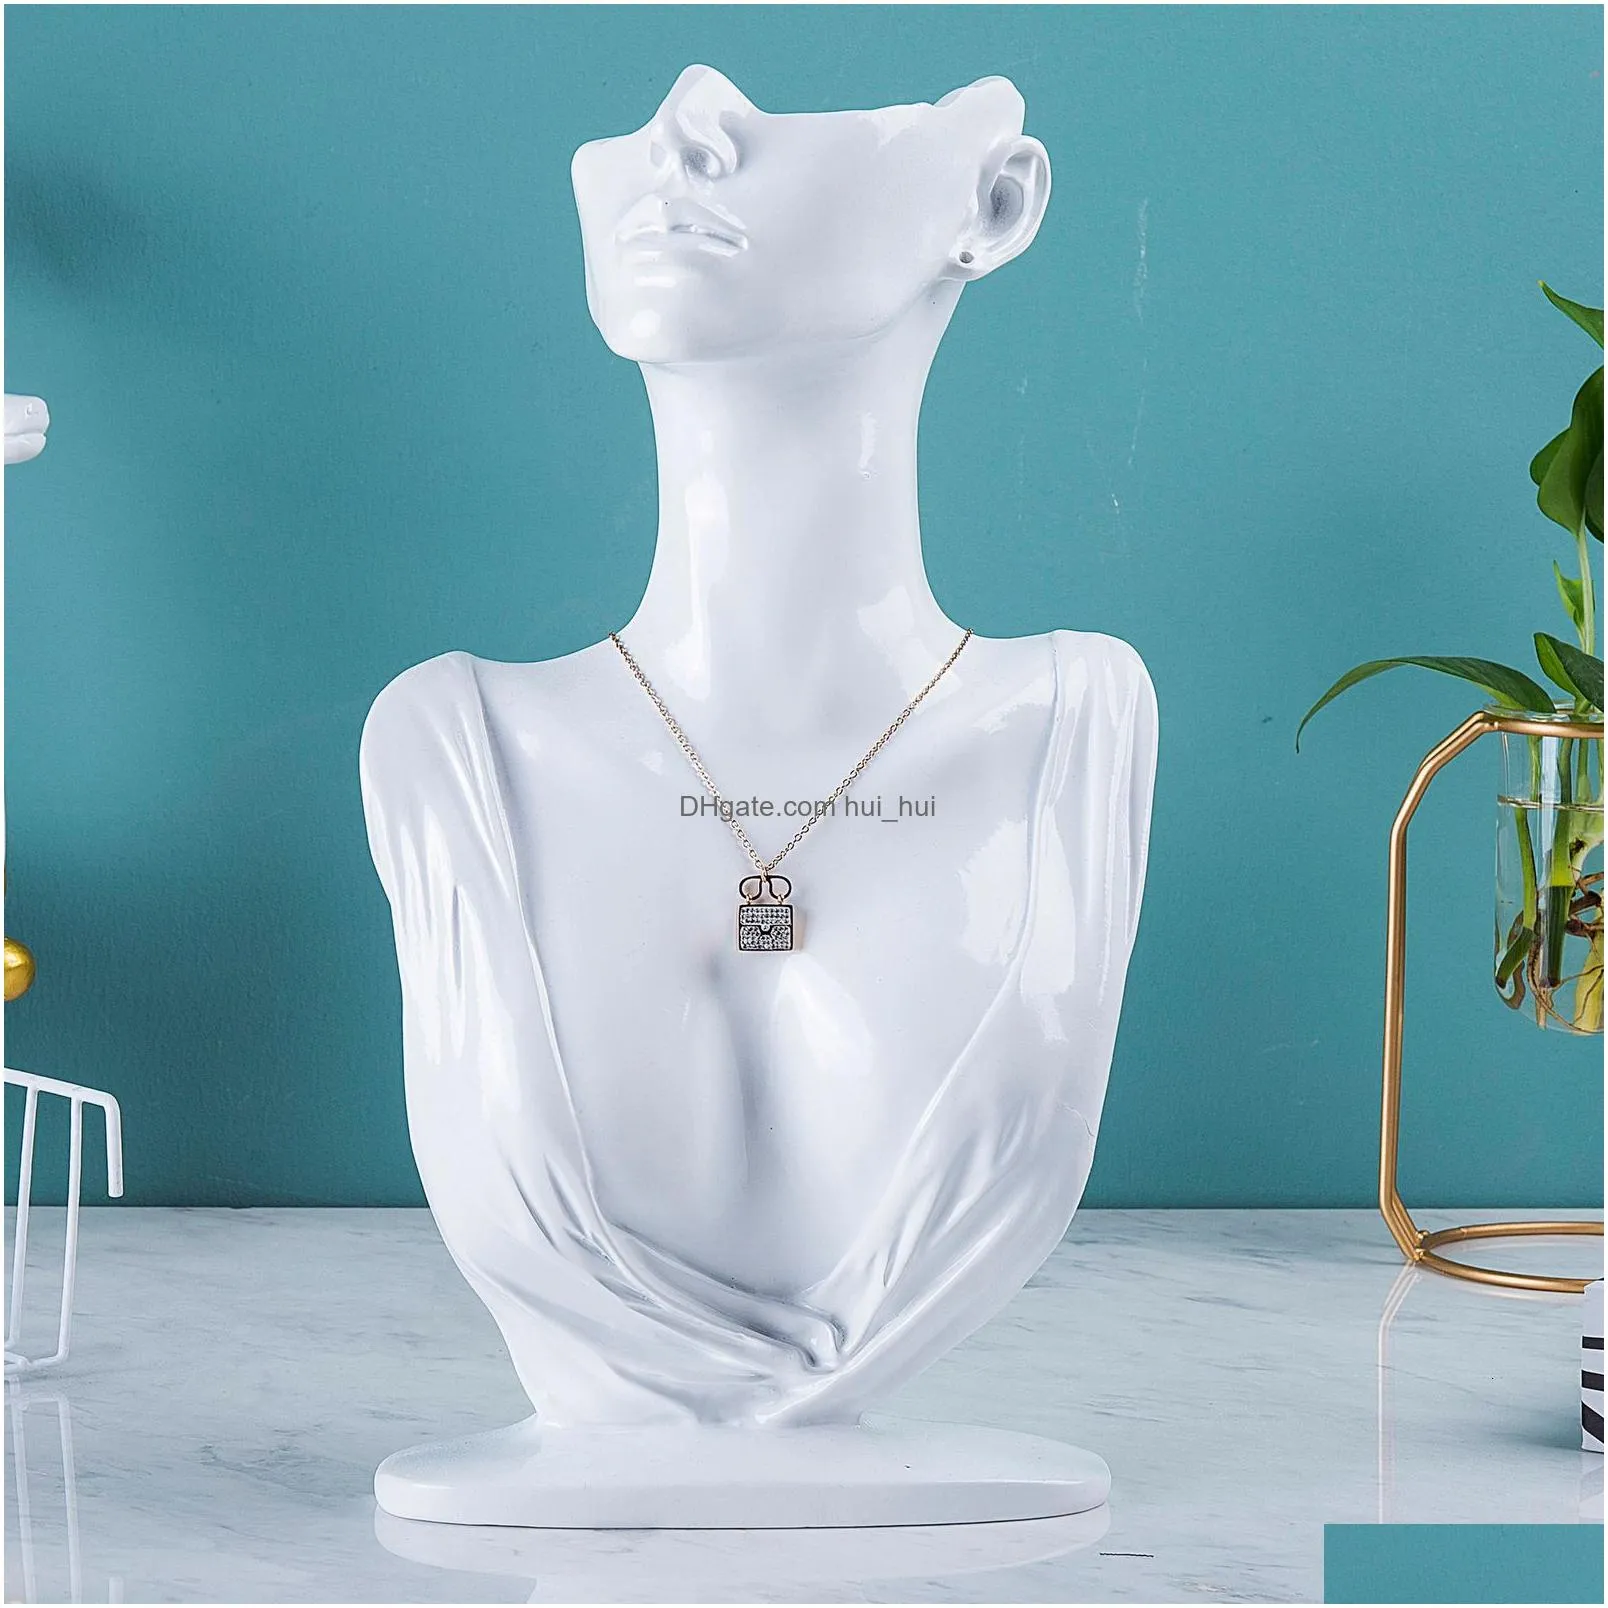 mannequin top selling lms 3 size resin medium side portrait model earrings necklace jewelry display stand necklace display props